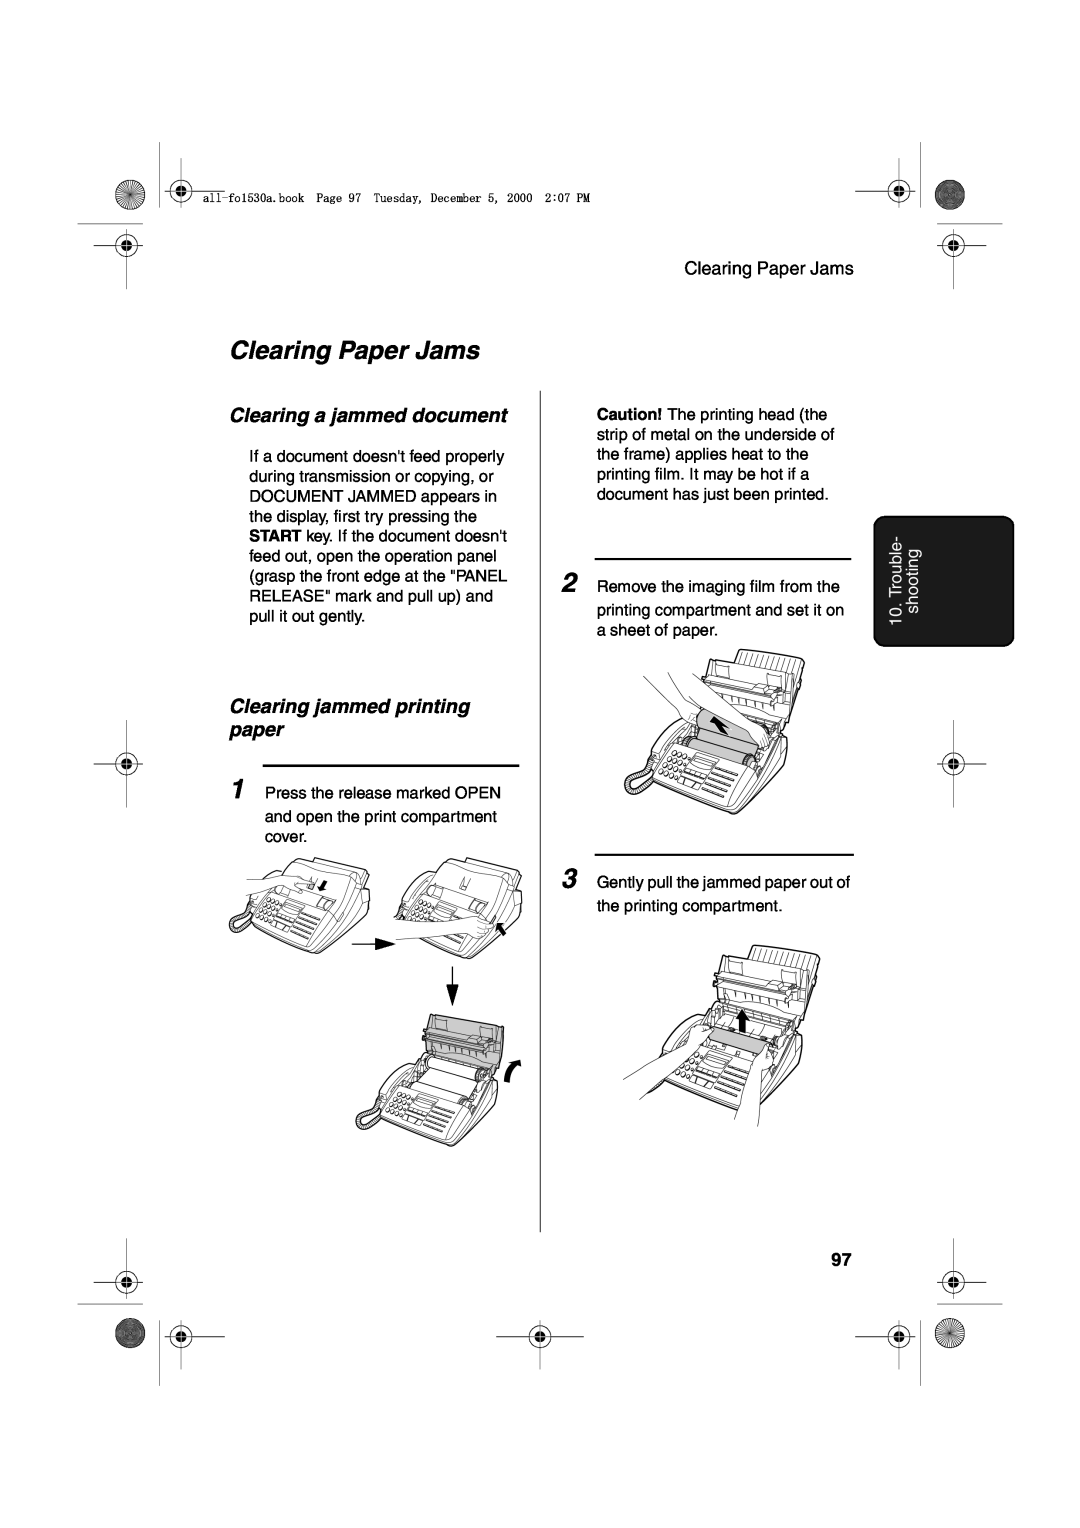 Sharp FO-1530 Clearing Paper Jams, Clearing a jammed document, Clearing jammed printing paper, Trouble- shooting 